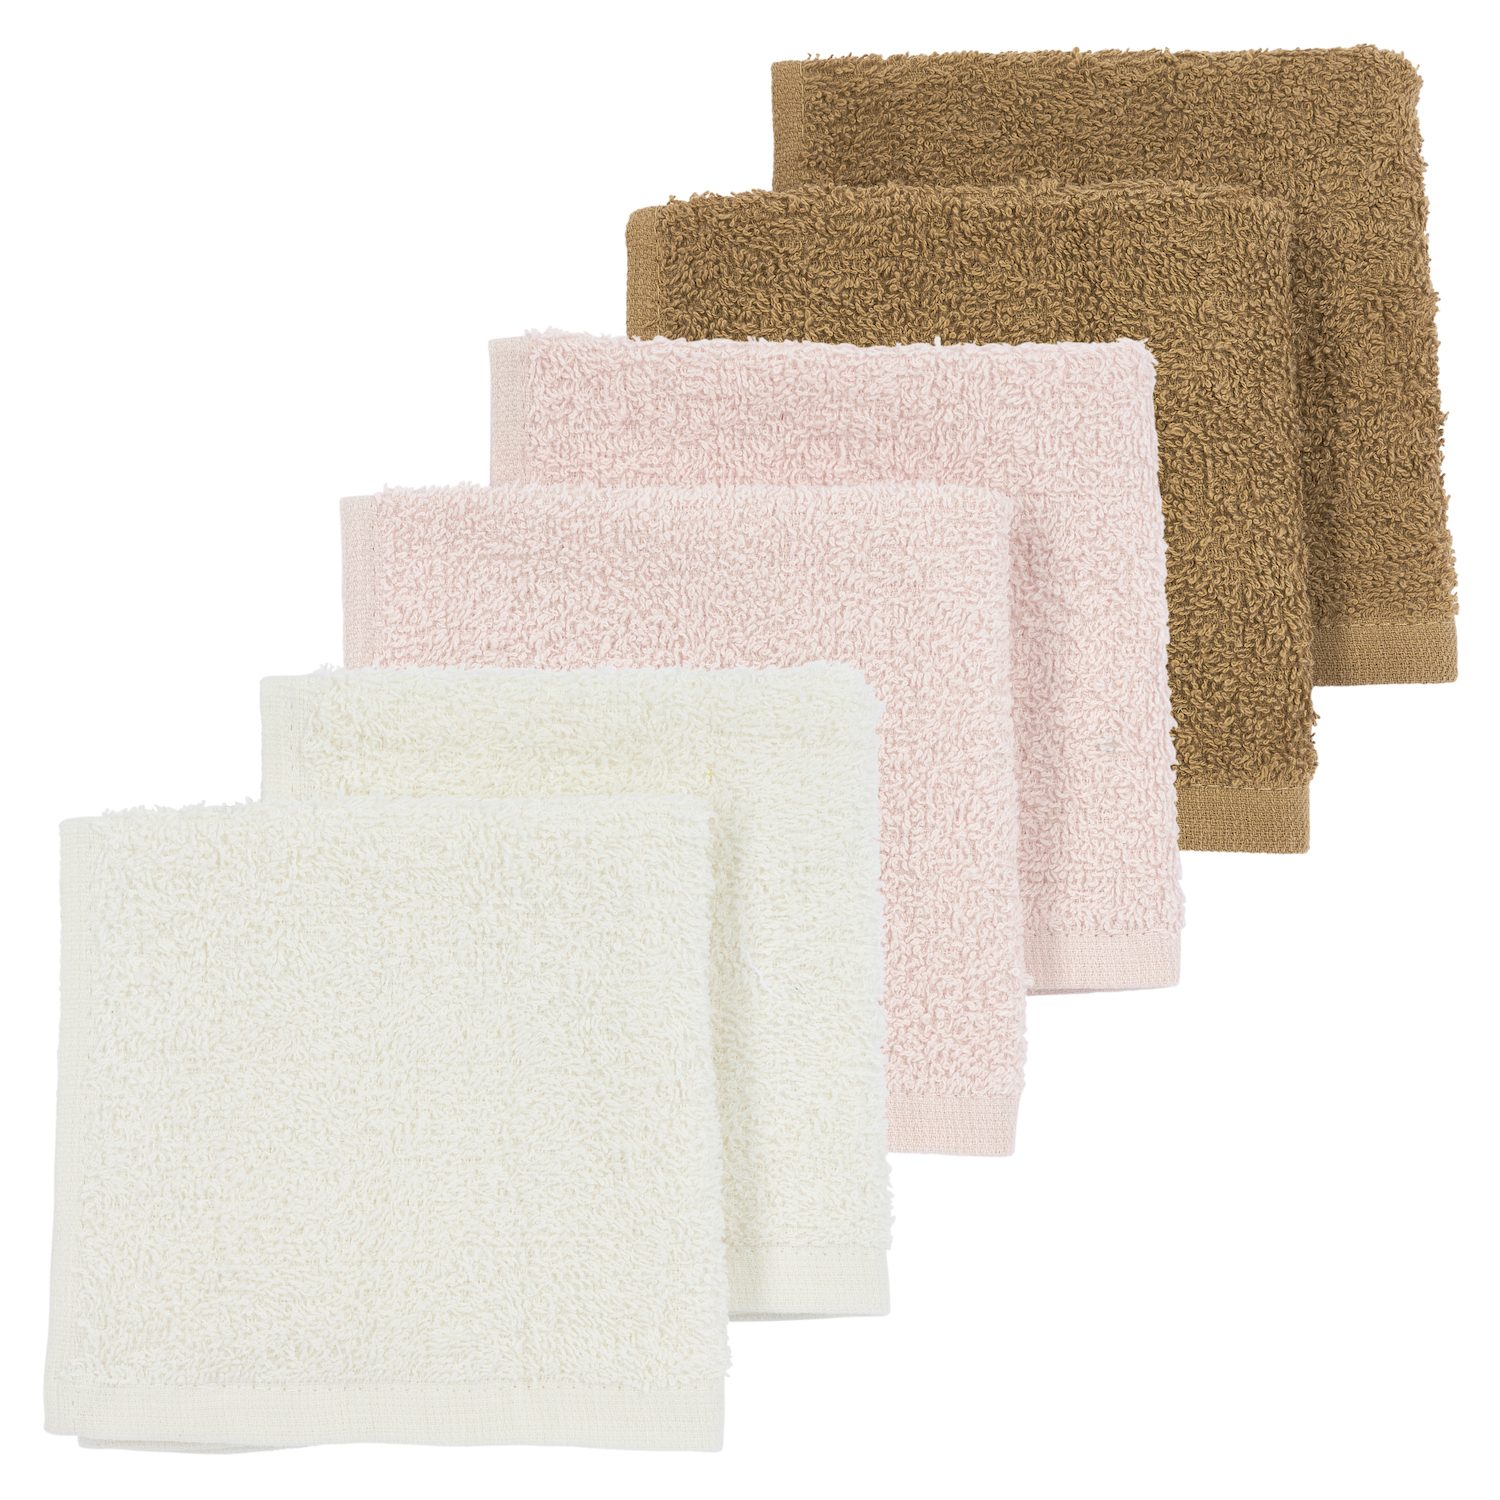 Basic Terry Face Cloths 6-pack - Offwhite/Soft Pink/Toffee - 30x30cm